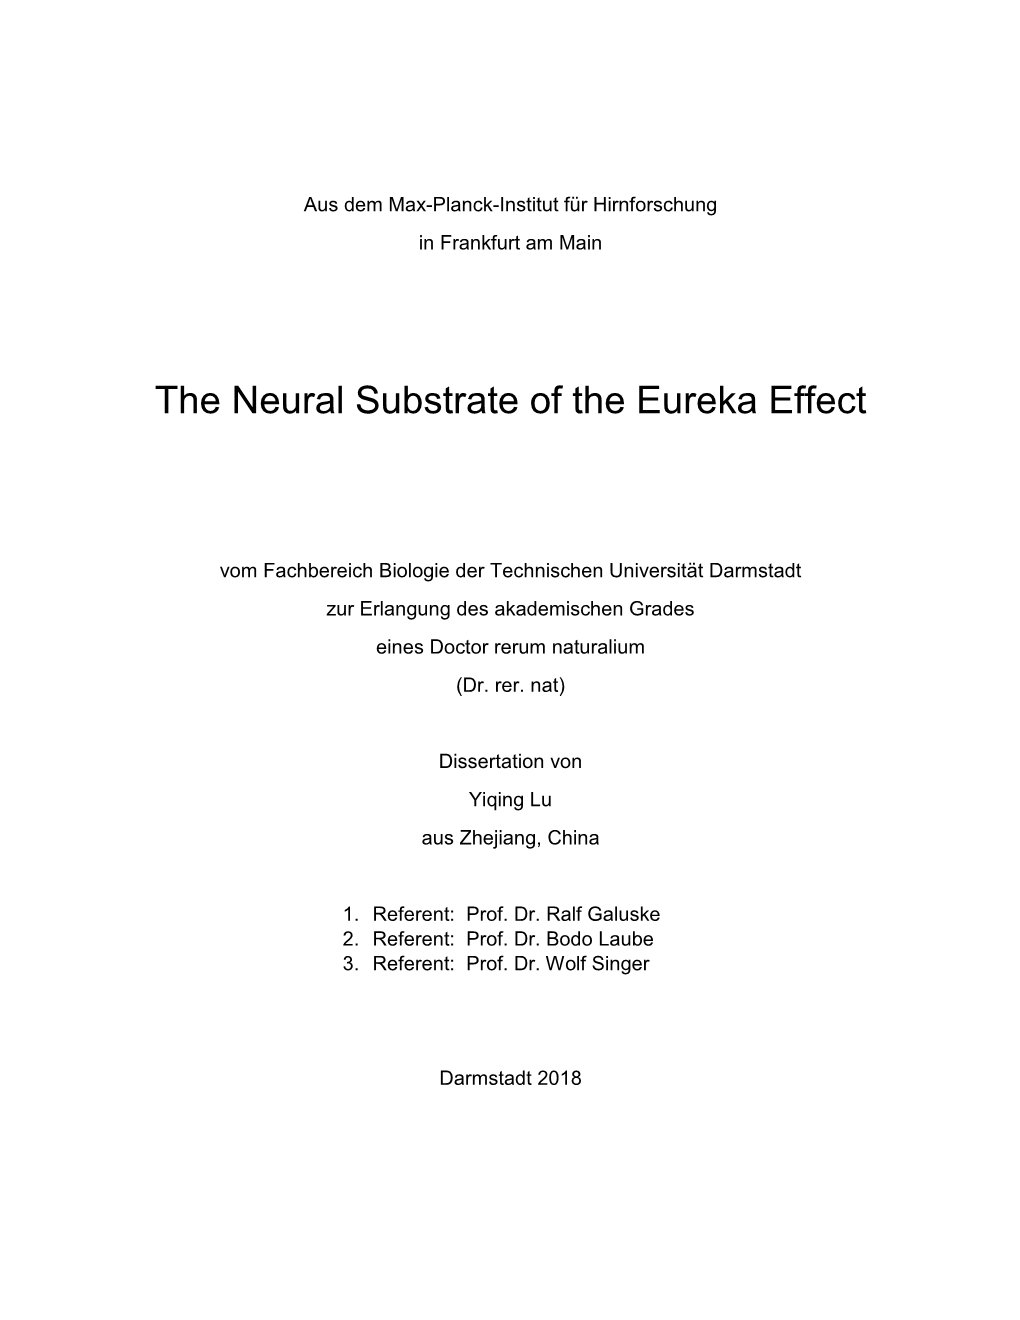 The Neural Substrate of the Eureka Effect